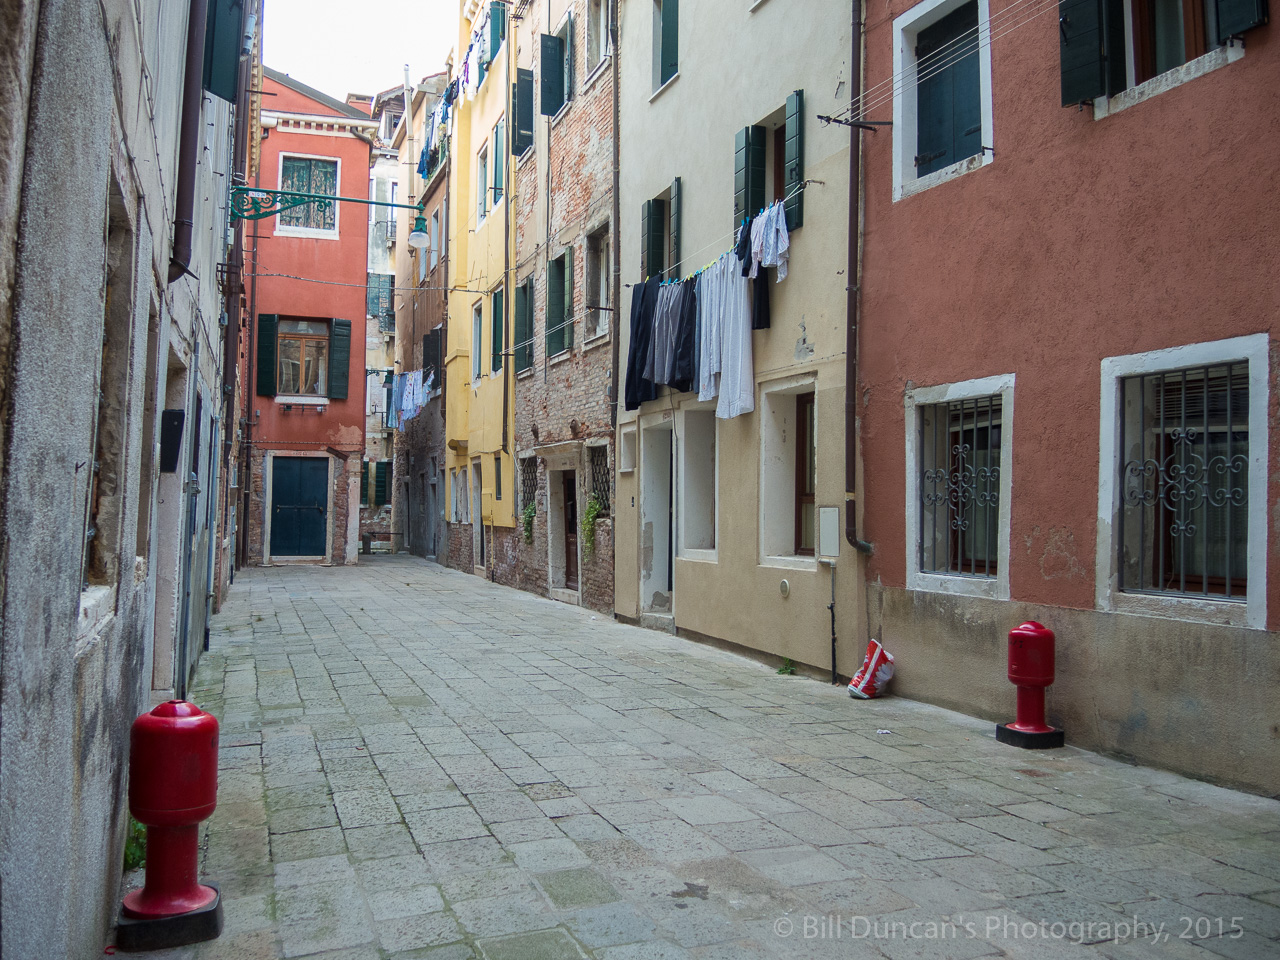 Around 60,000 reside in main part of Venice.